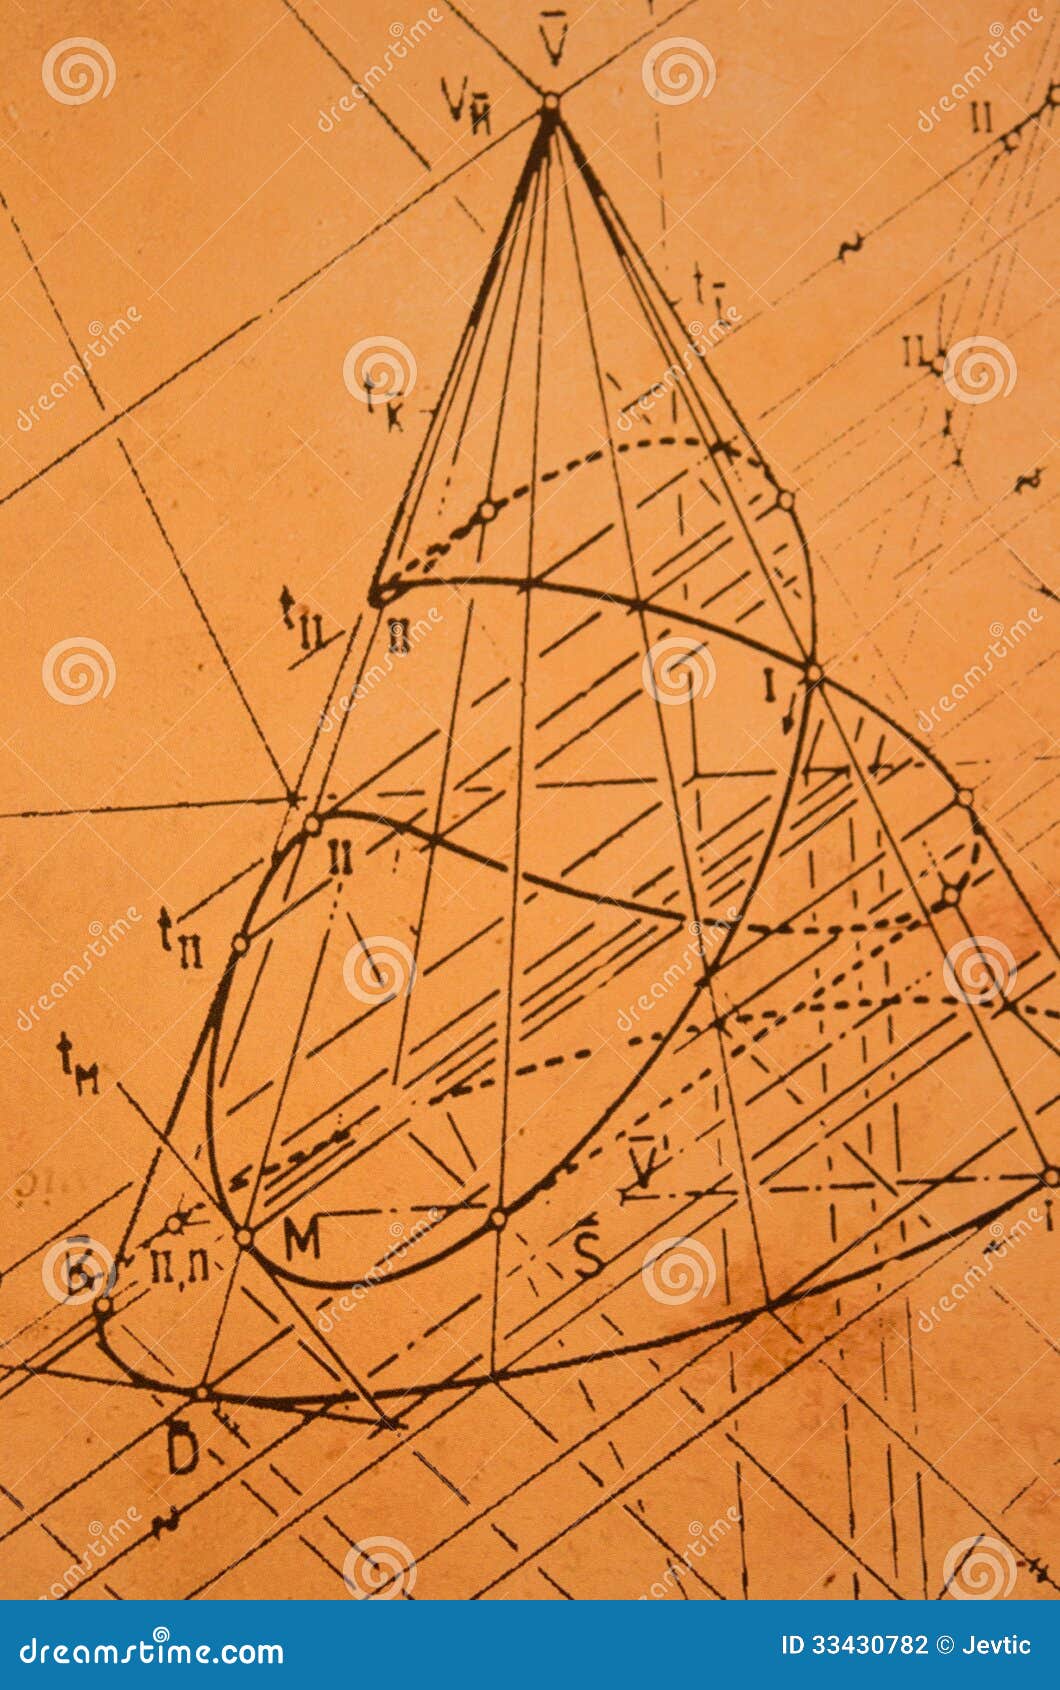 descriptive geometry old sketch yellowed paper 33430782